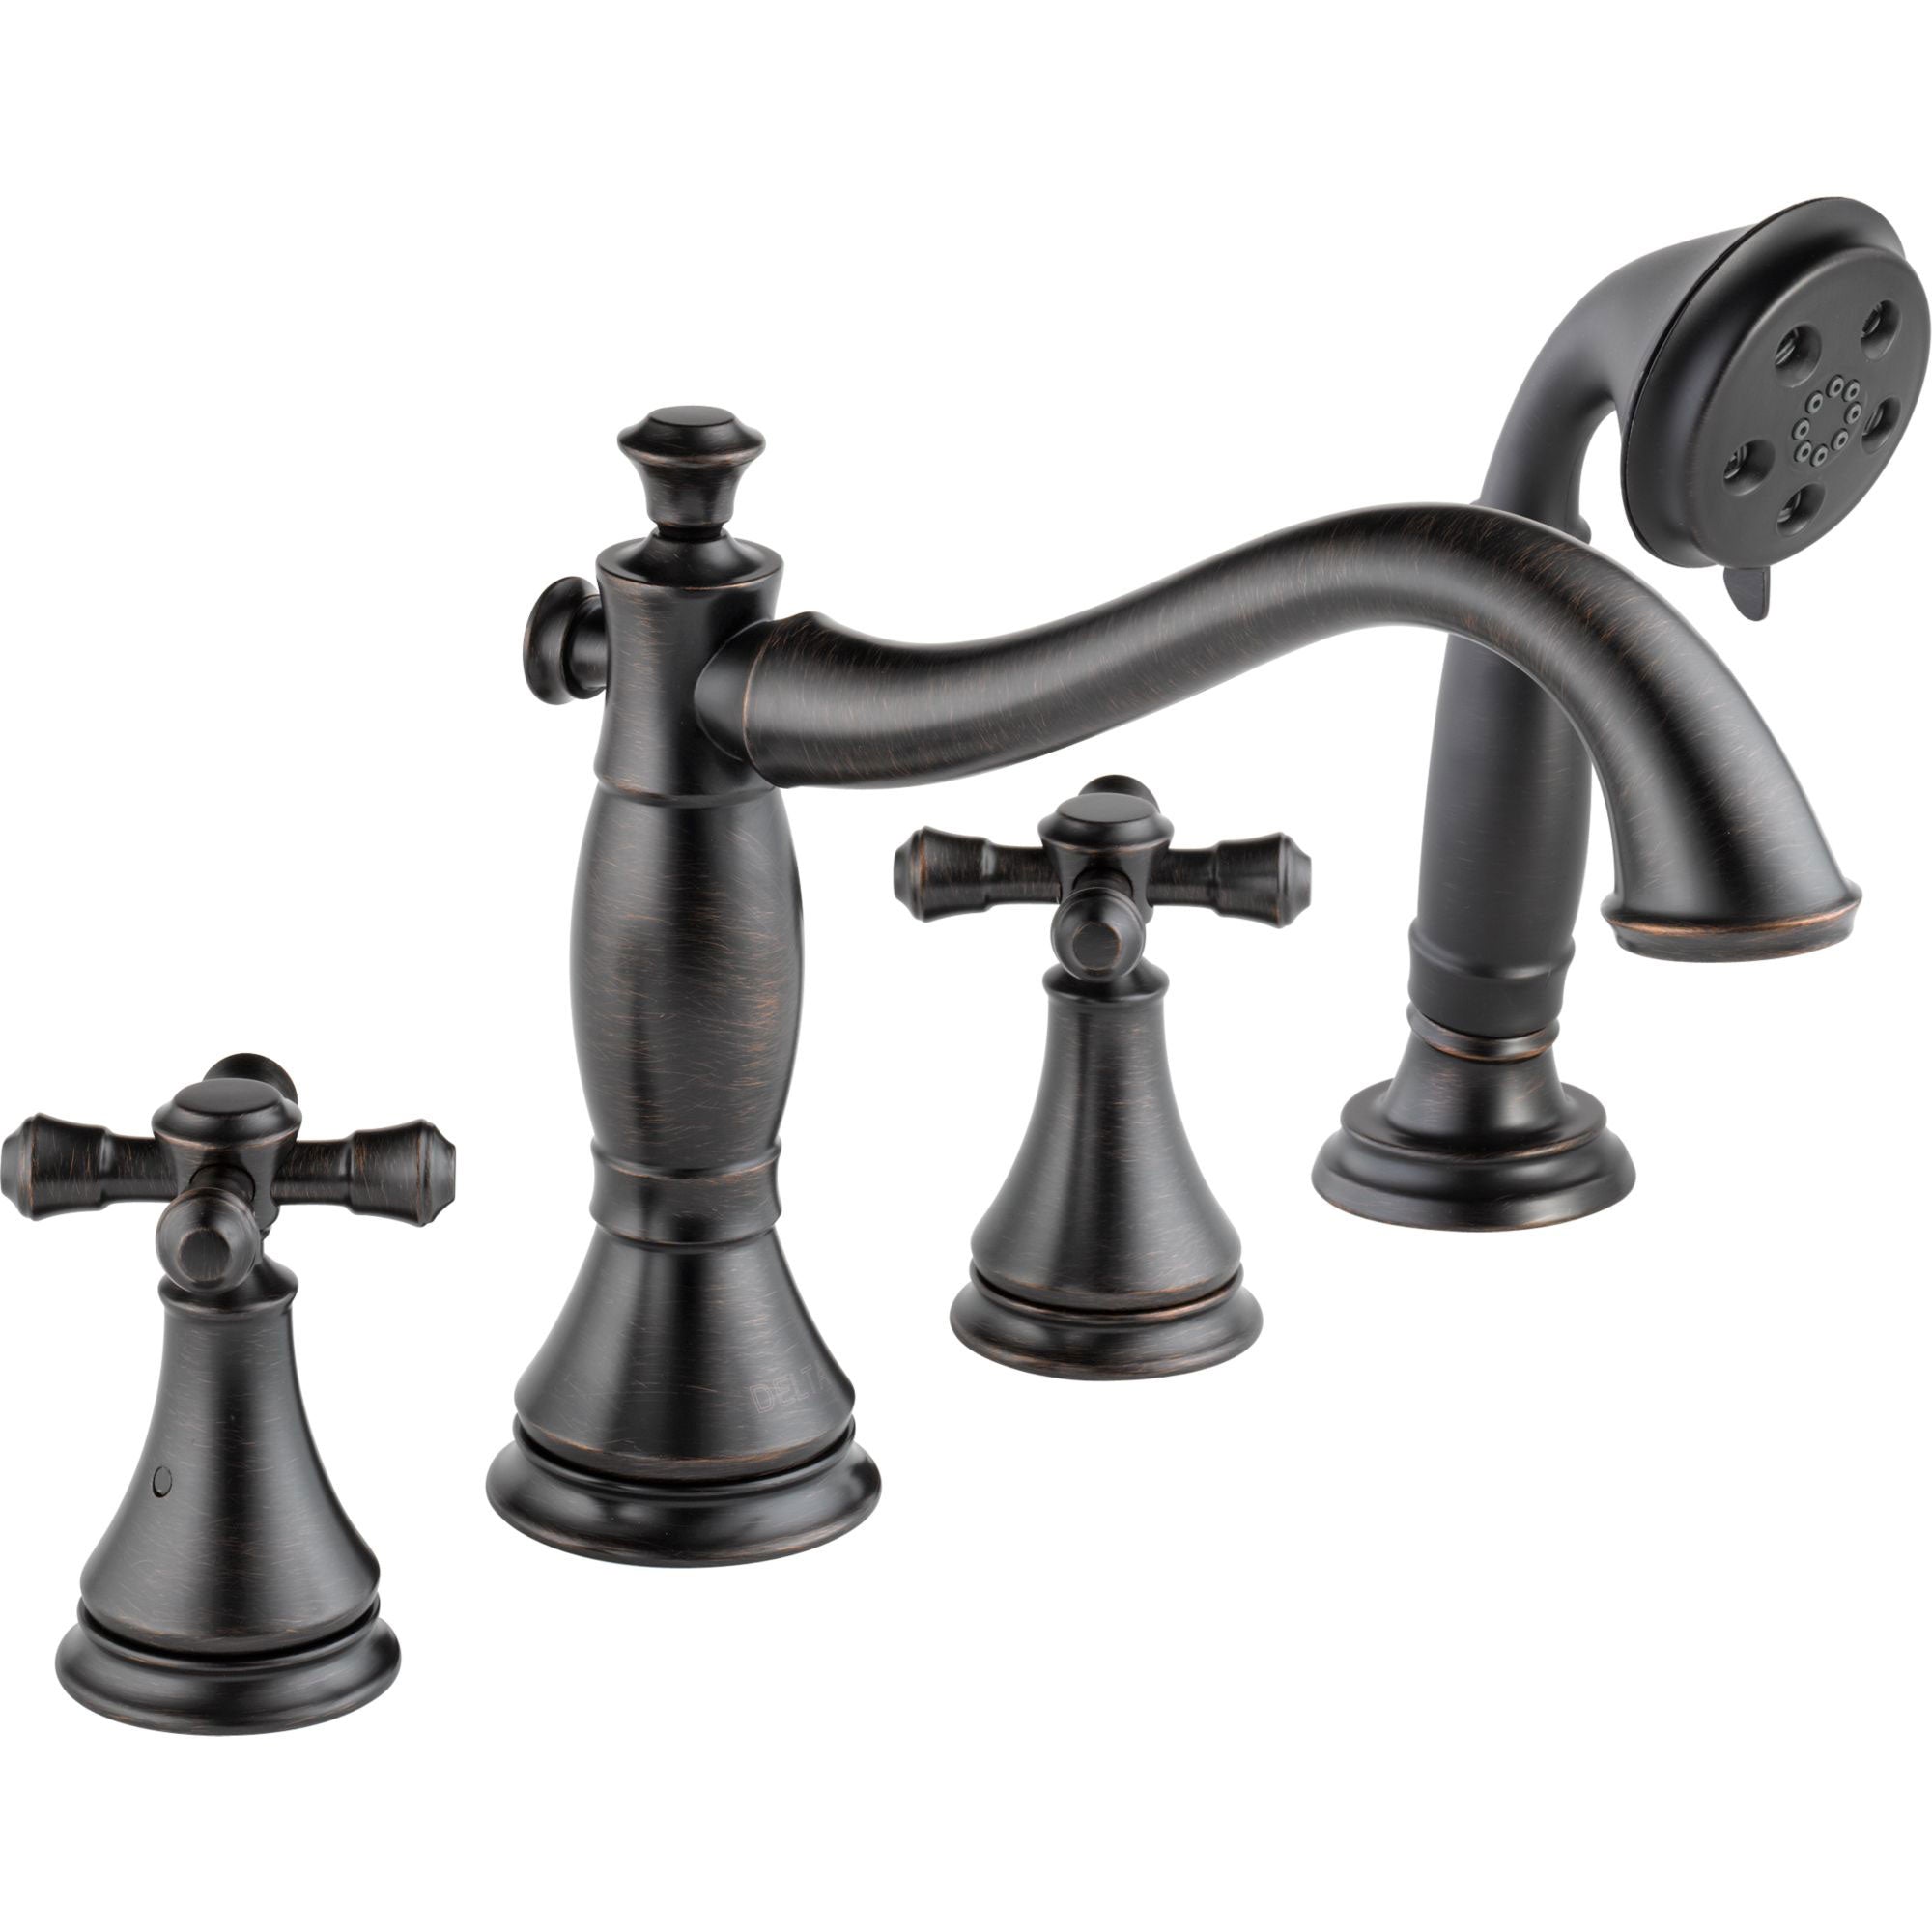 Delta Cassidy Venetian Bronze Roman Tub Filler Faucet with Hand Shower Spray INCLUDES Valve and Cross Handles D1055V